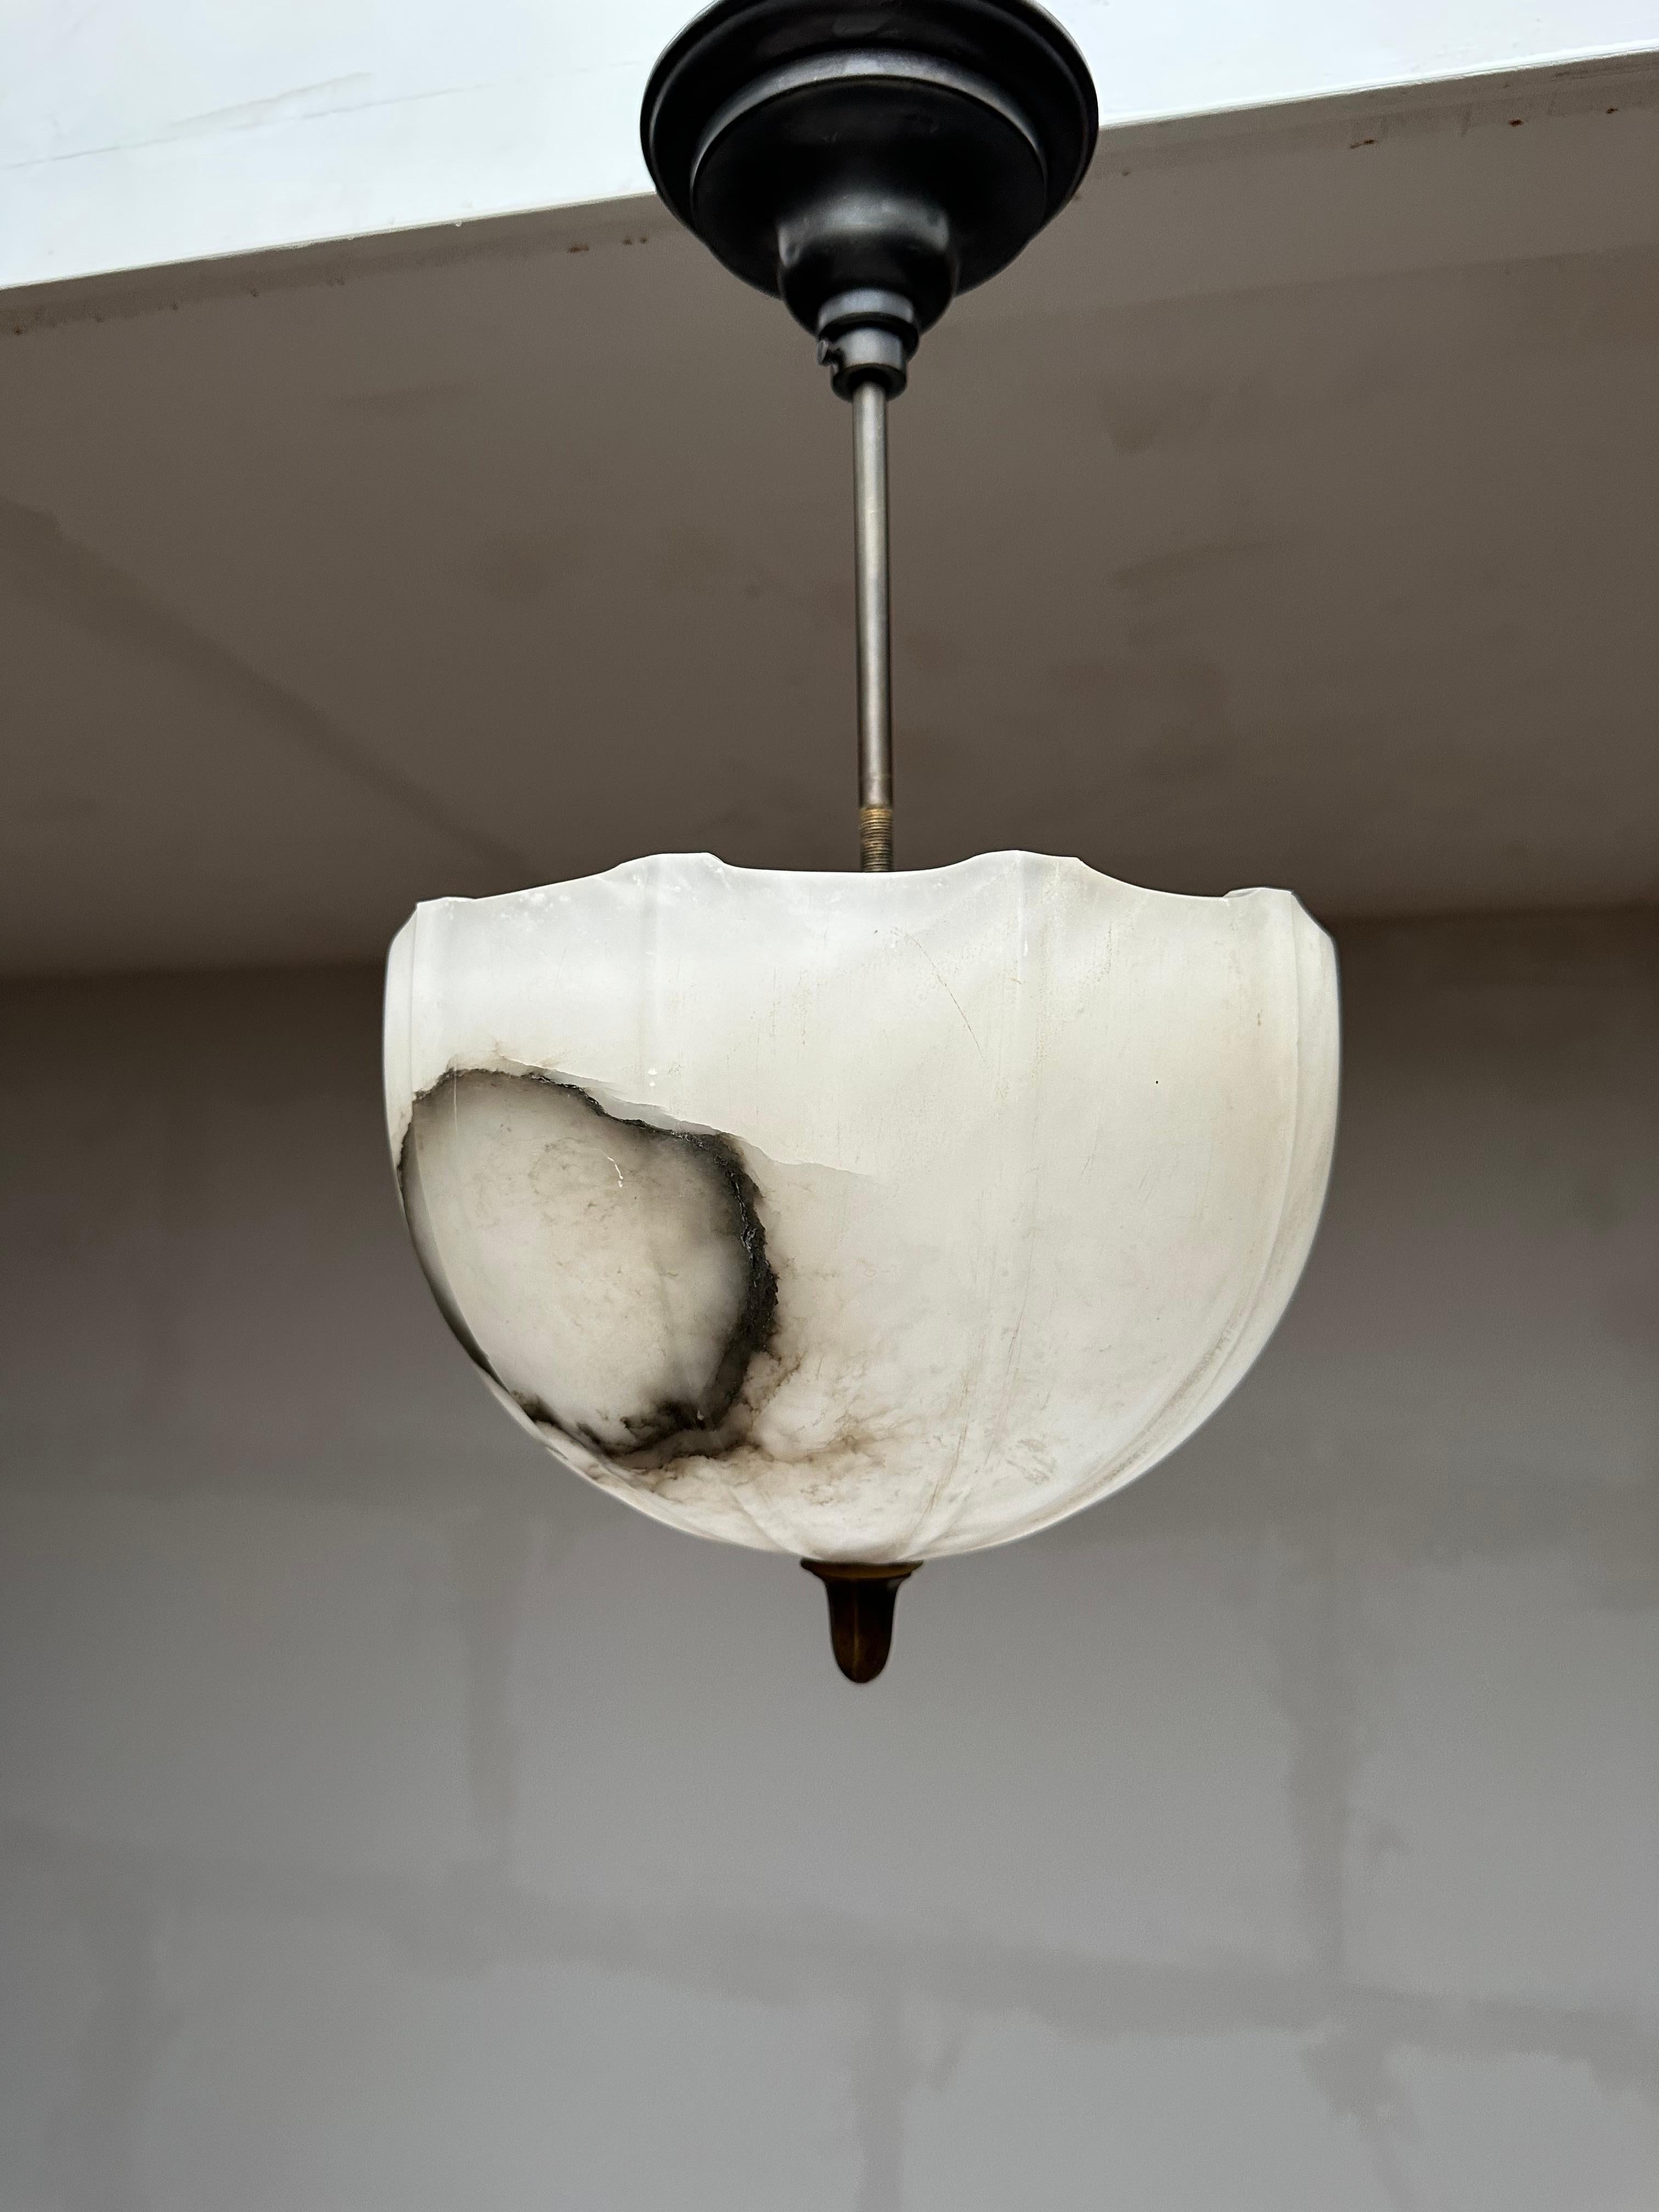 Unique and small size, two-light, white alabaster ceiling lamp of superb quality and condition.

This light fixture from the heydays of the European Art Deco era will light up both your days and evenings. Its timeless shade is all hand carved out of